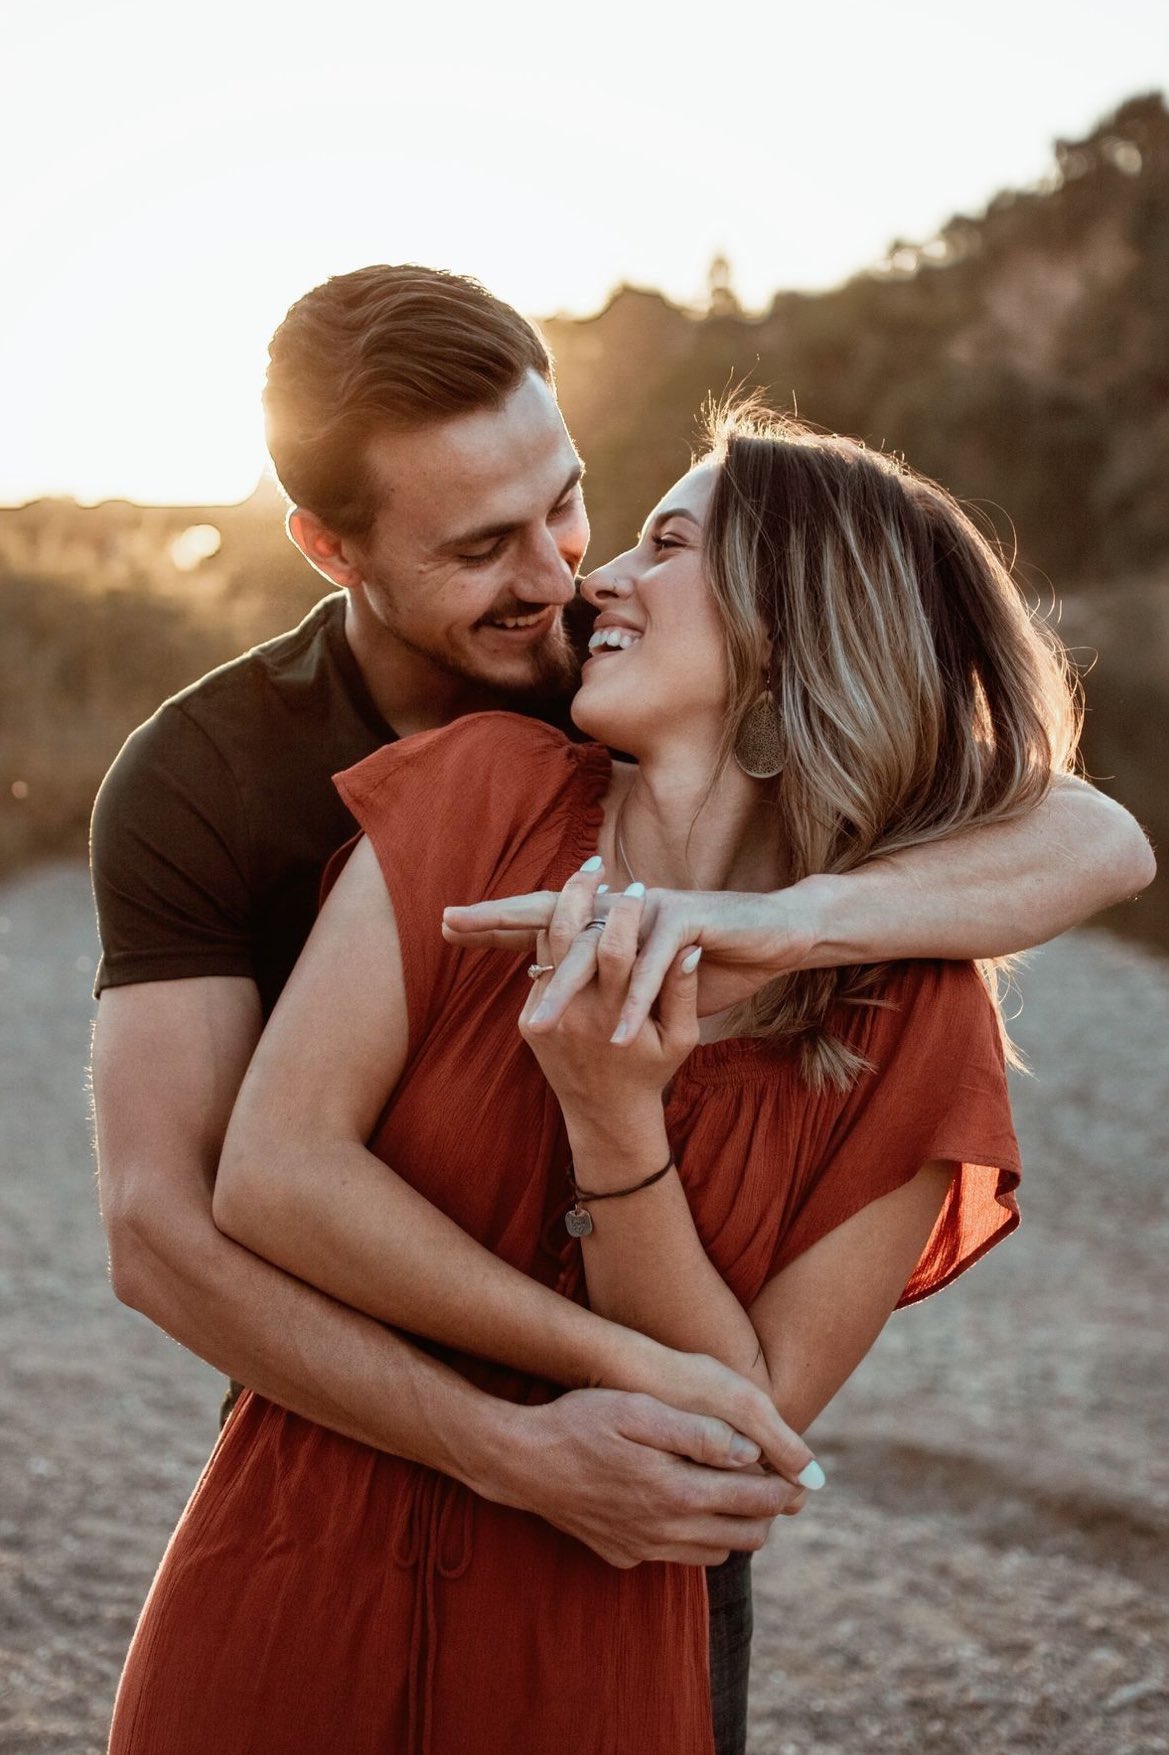 15 Cute Couple Poses Capturing Love and Joy in Every Frame